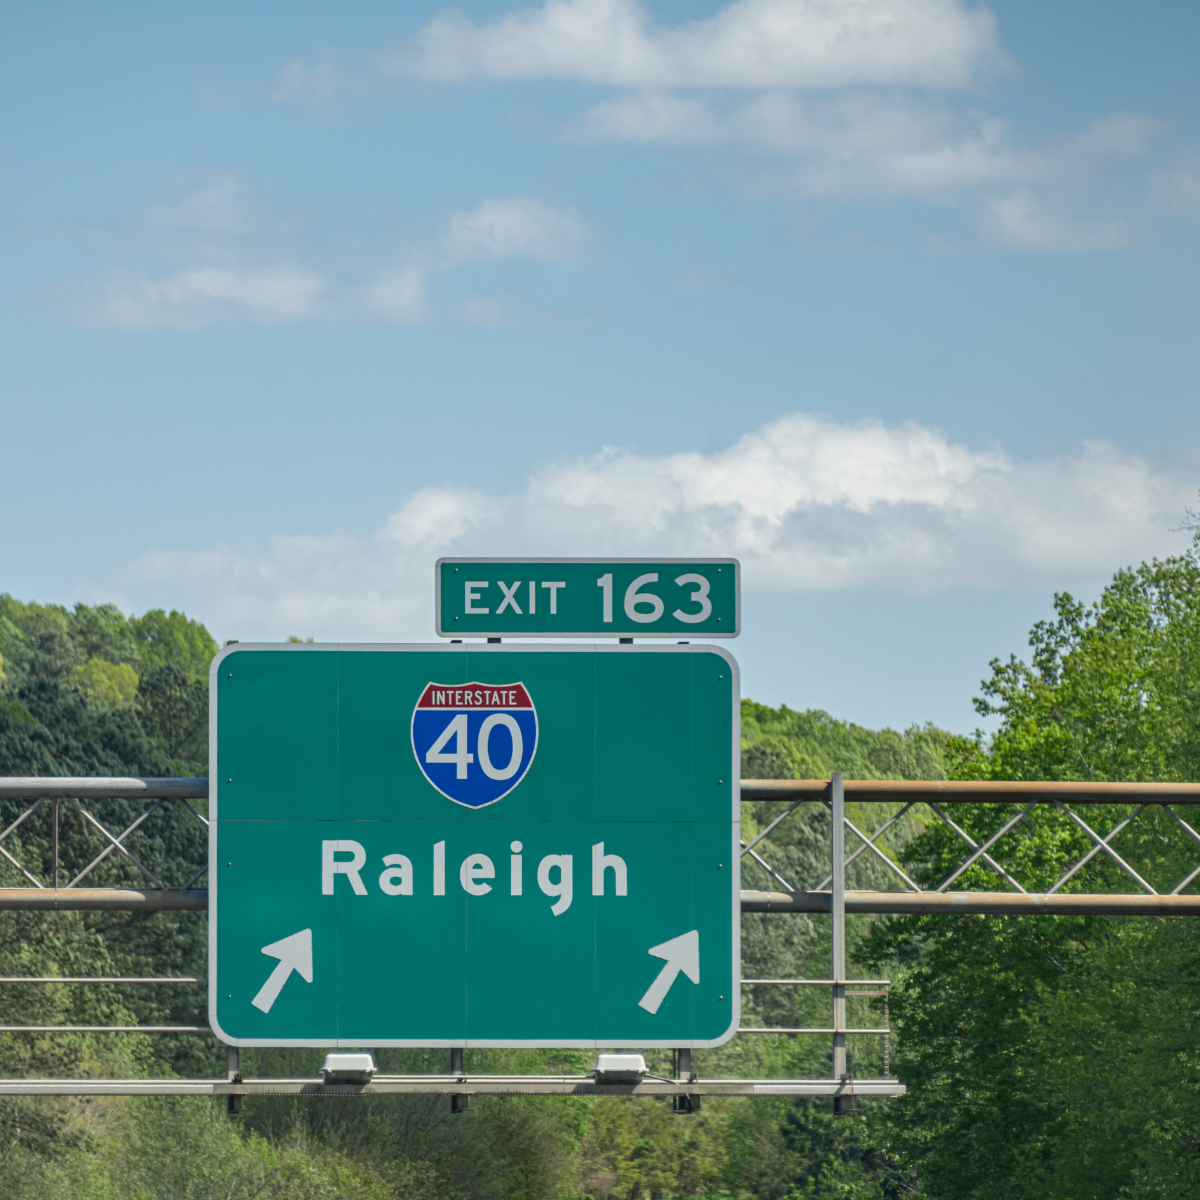 10 Reasons to Relocate to the Research Triangle